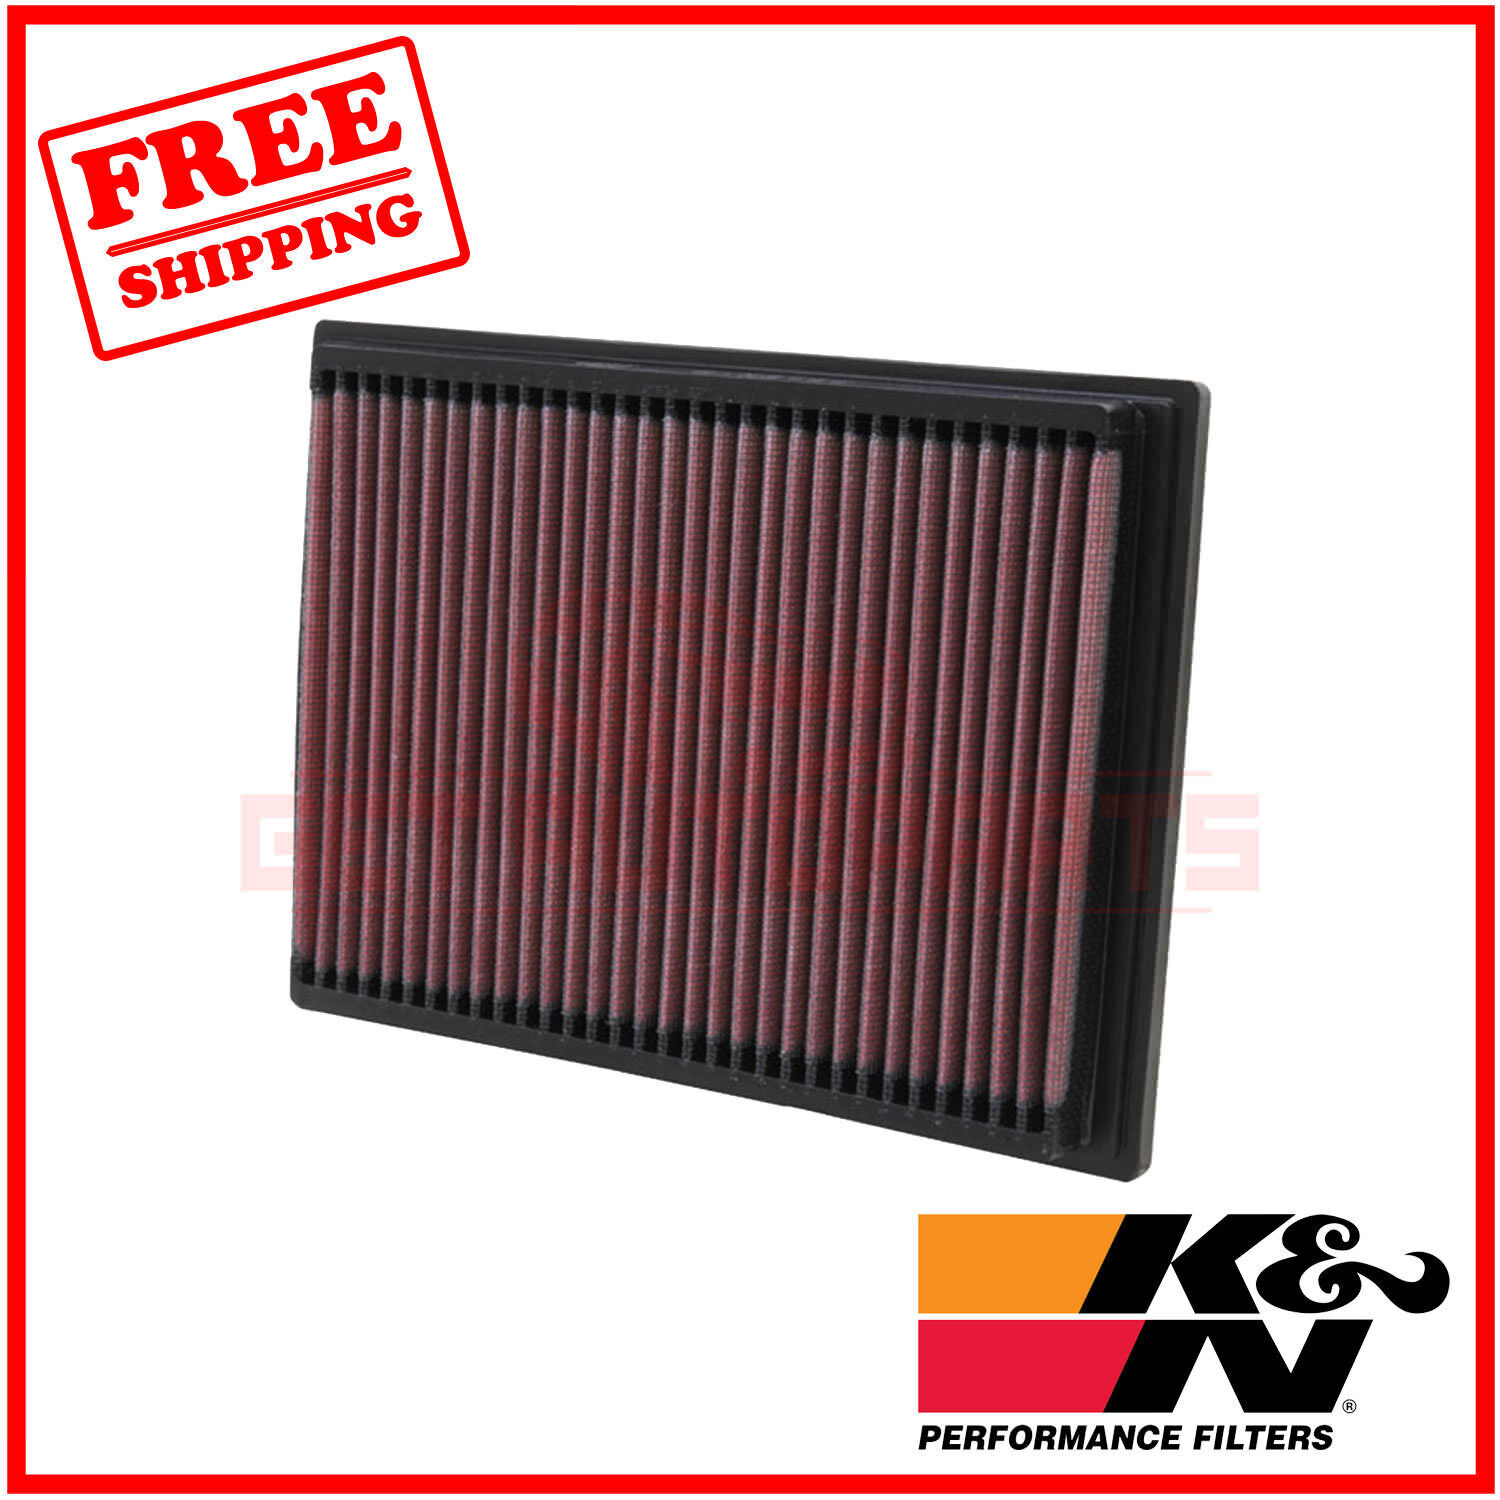 K&N Replacement Air Filter for BMW 325is 1992-1995